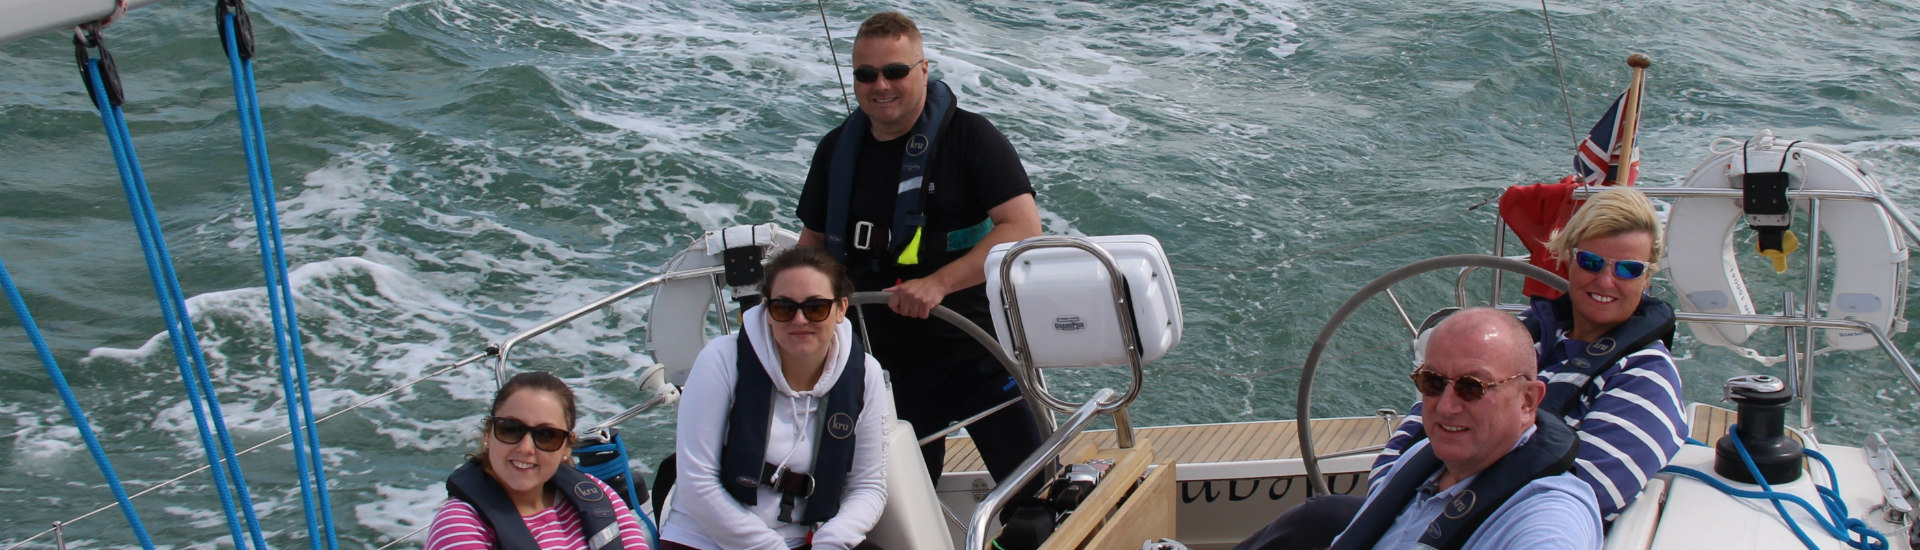 Boat Hire Solent Yacht Charters and Outdoor Activities